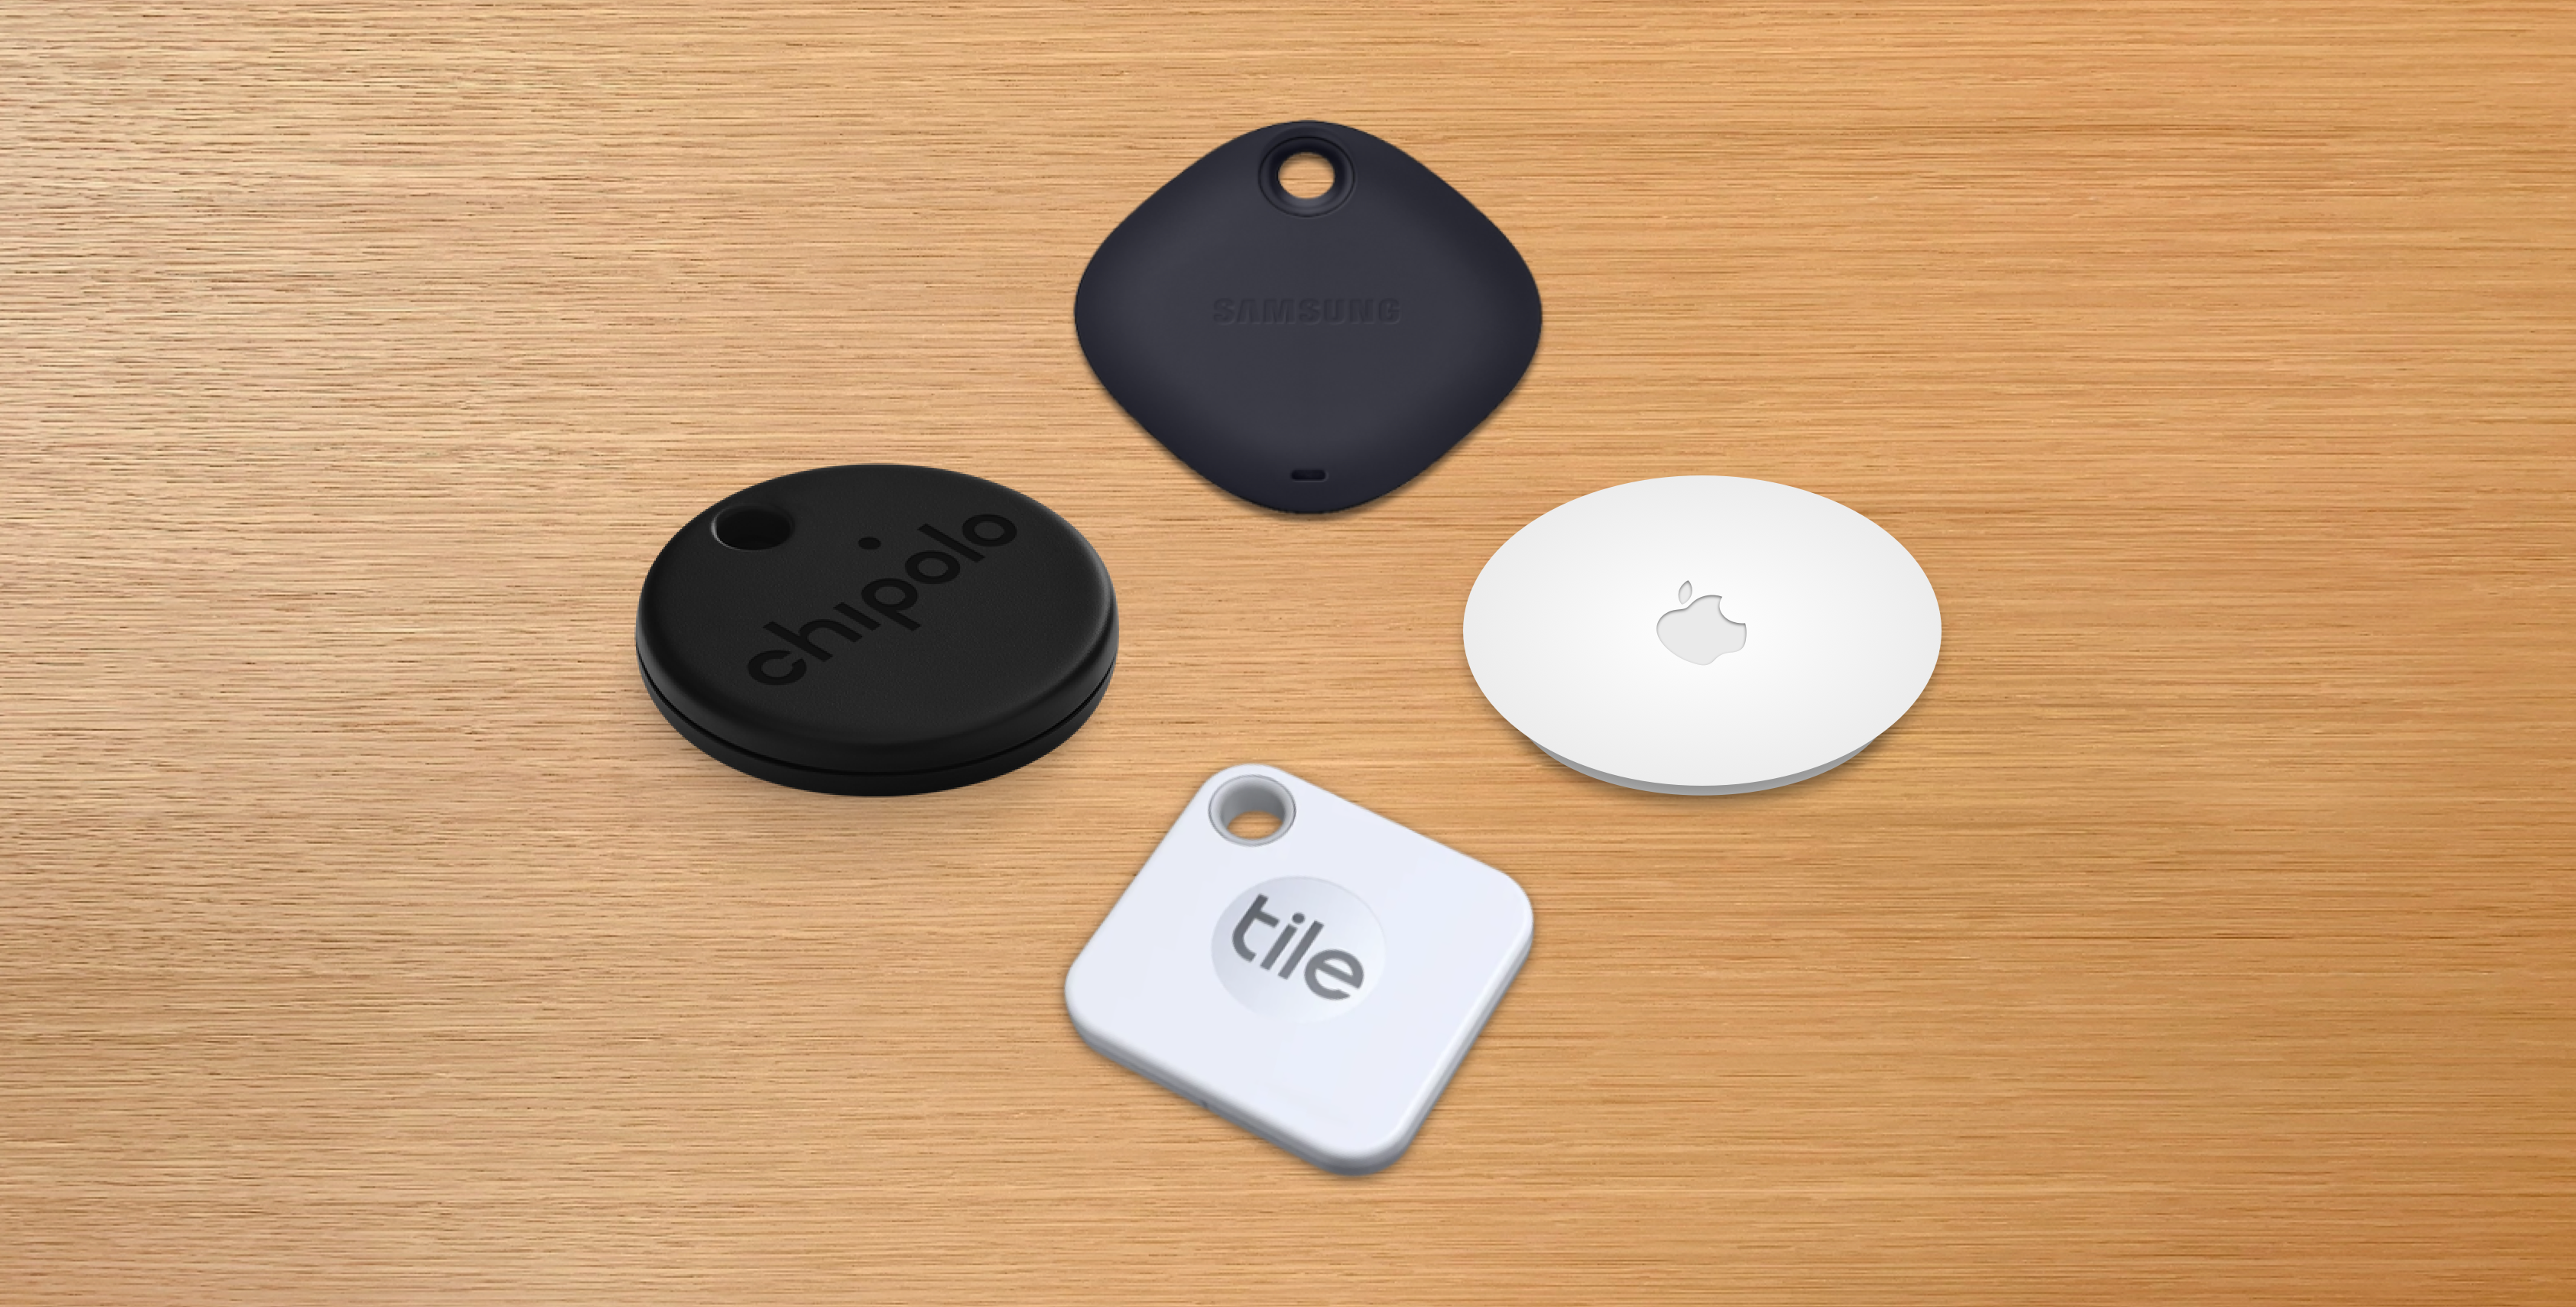 Apple AirTag review: R.I.P. Tile, this tracker magic is just too good